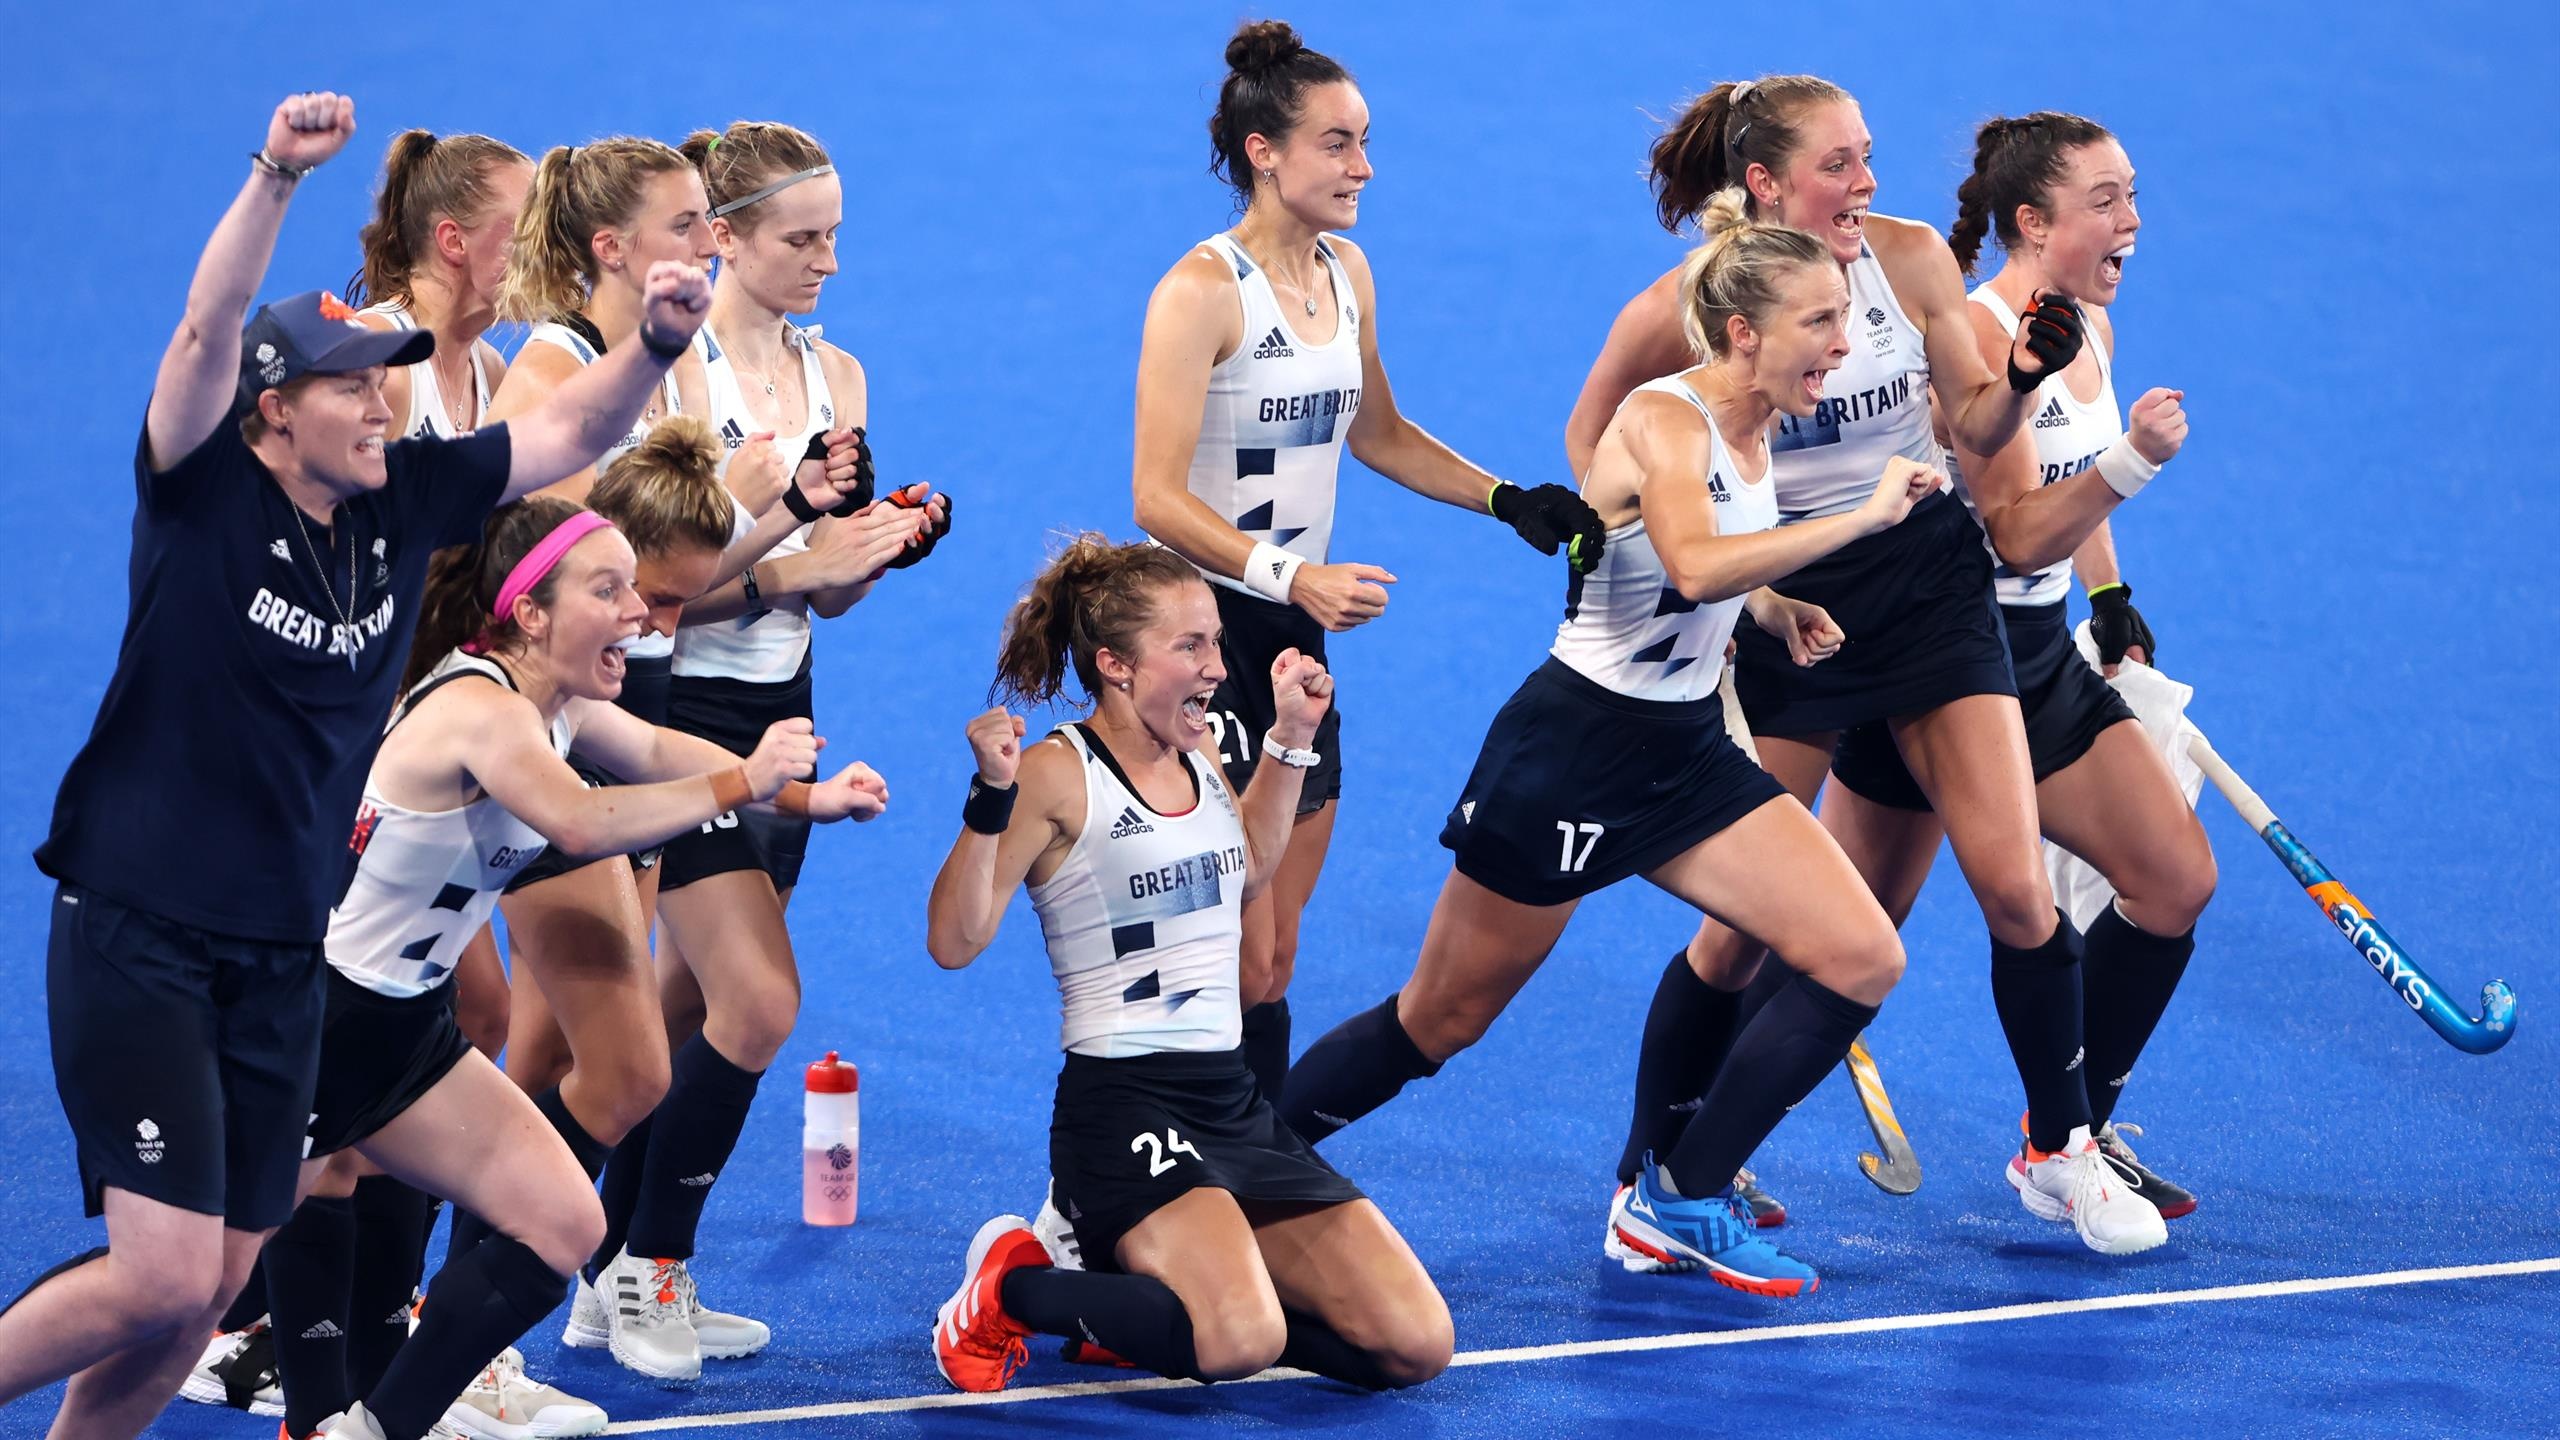 Field Hockey: The Great Britain women's national team celebrates the bronze medal at the 2020 Tokyo Summer Olympics. 2560x1440 HD Wallpaper.